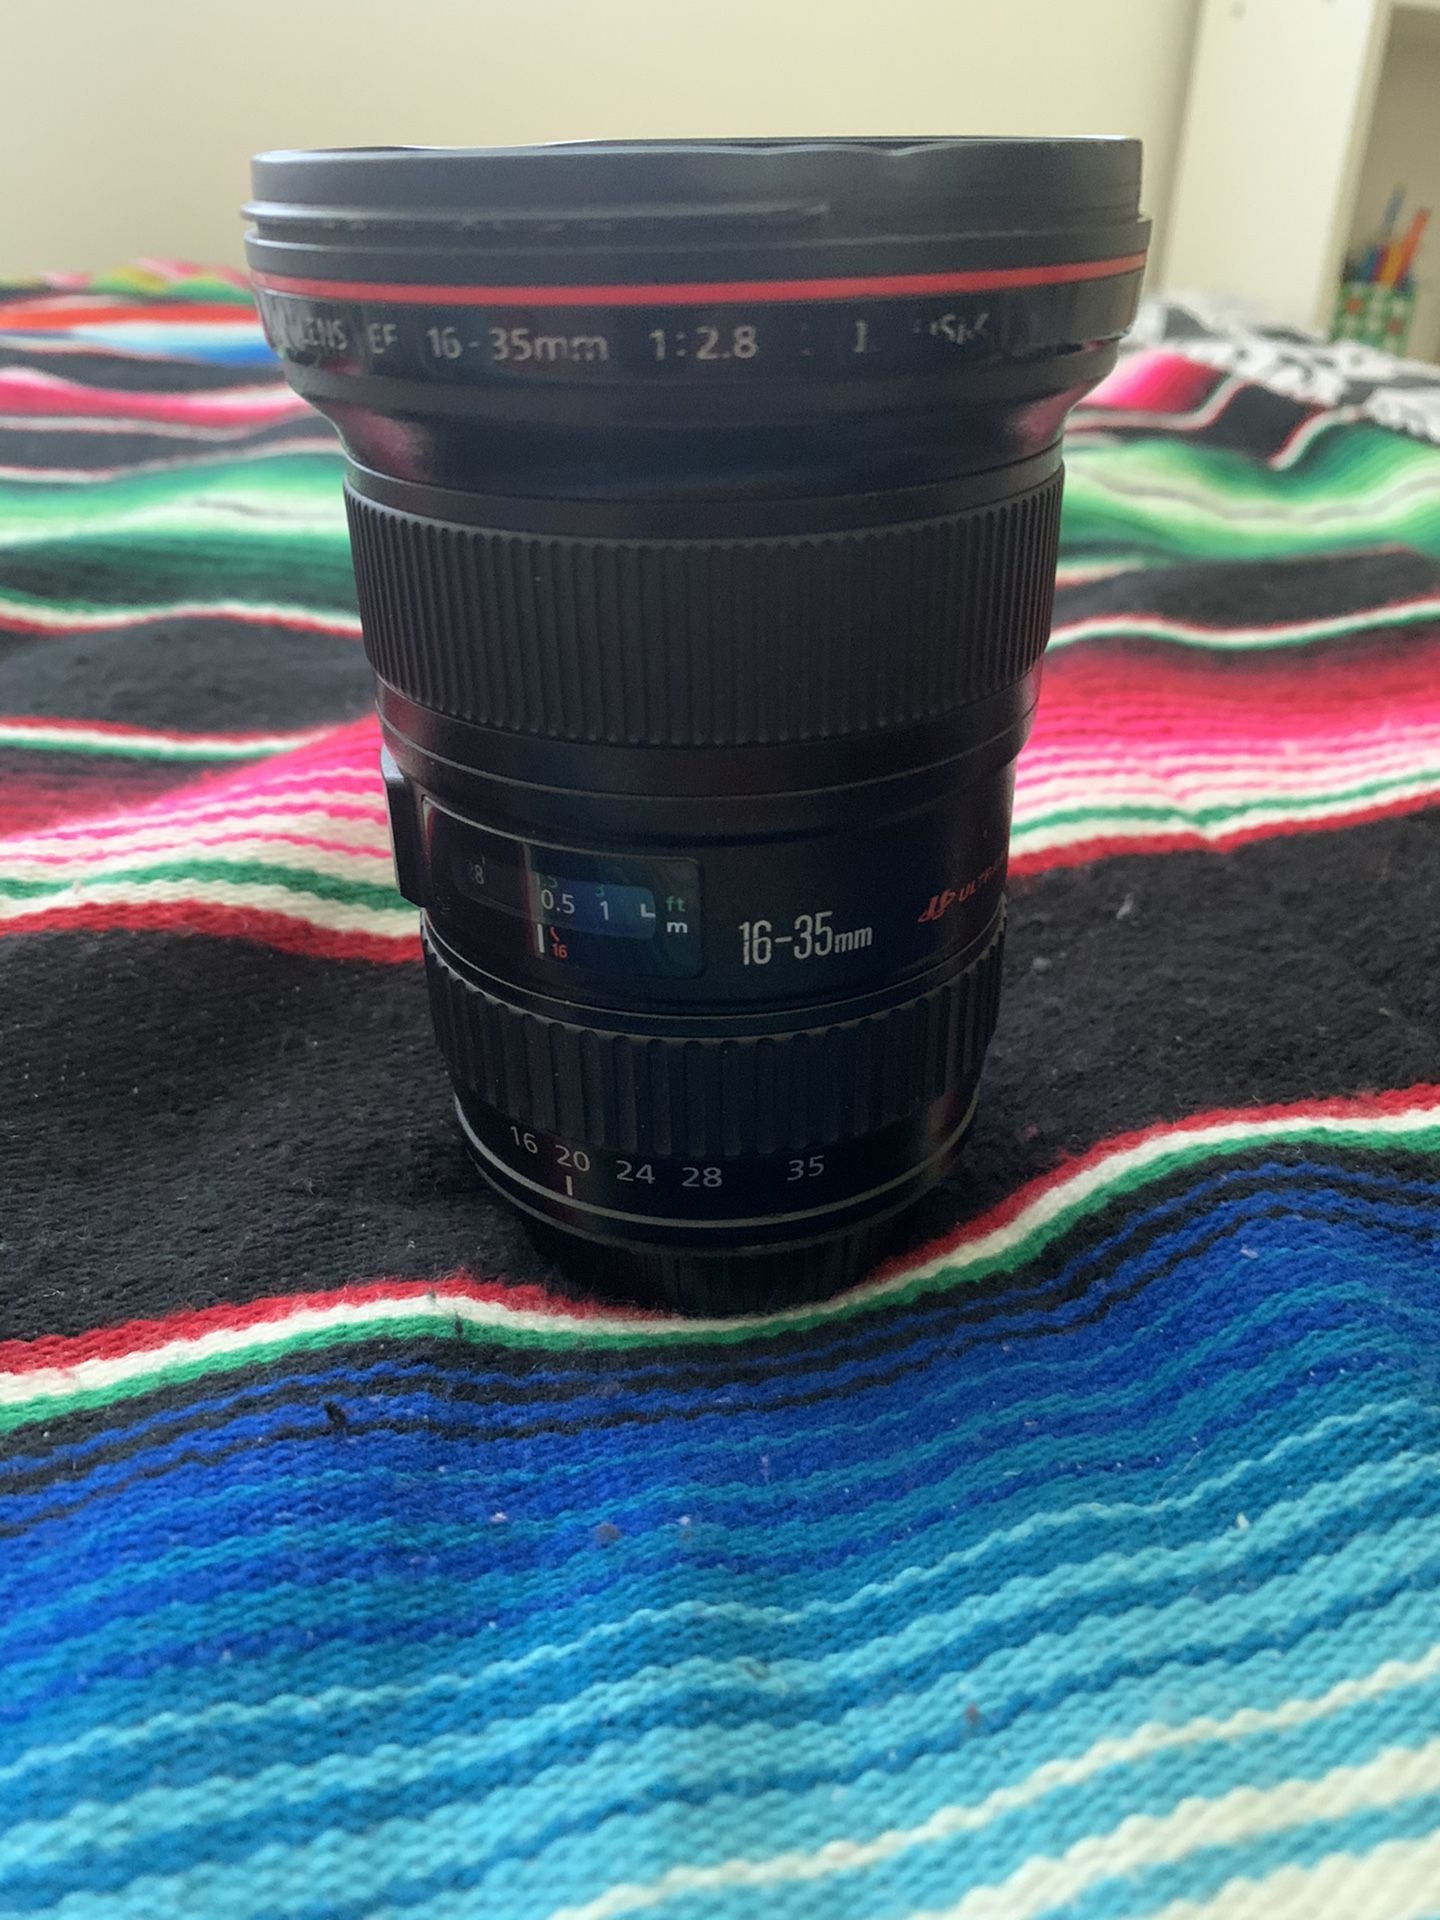 Canon 16-35mm f2.8 and Rebel t6i